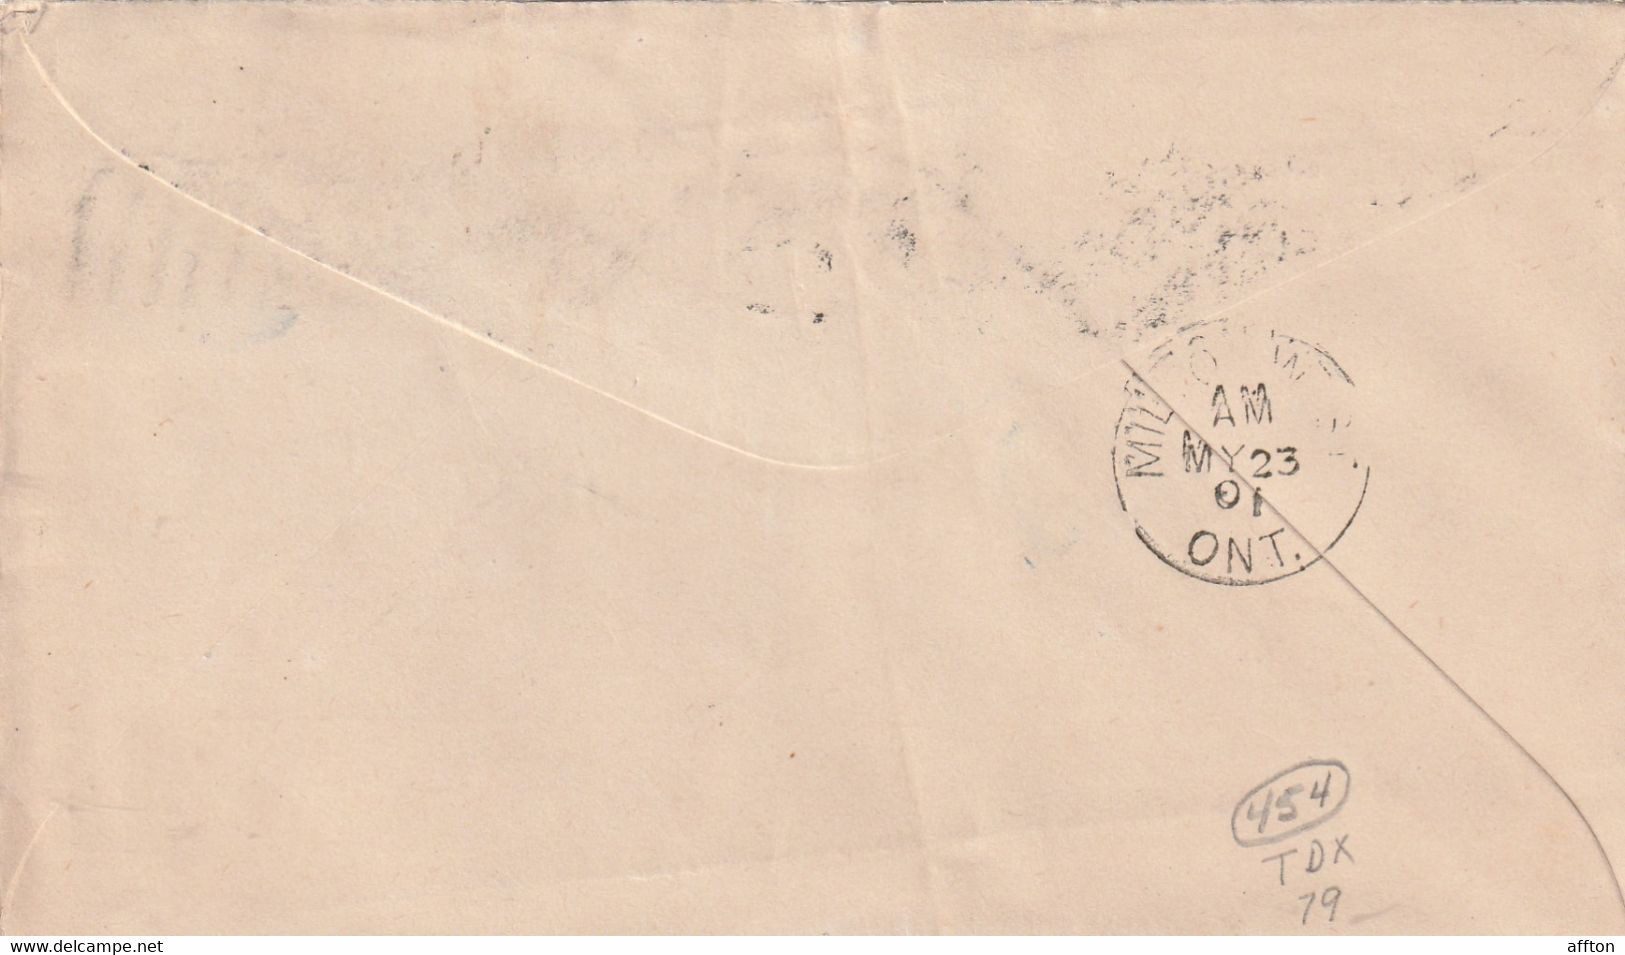 Canada Old Cover Mailed - Storia Postale